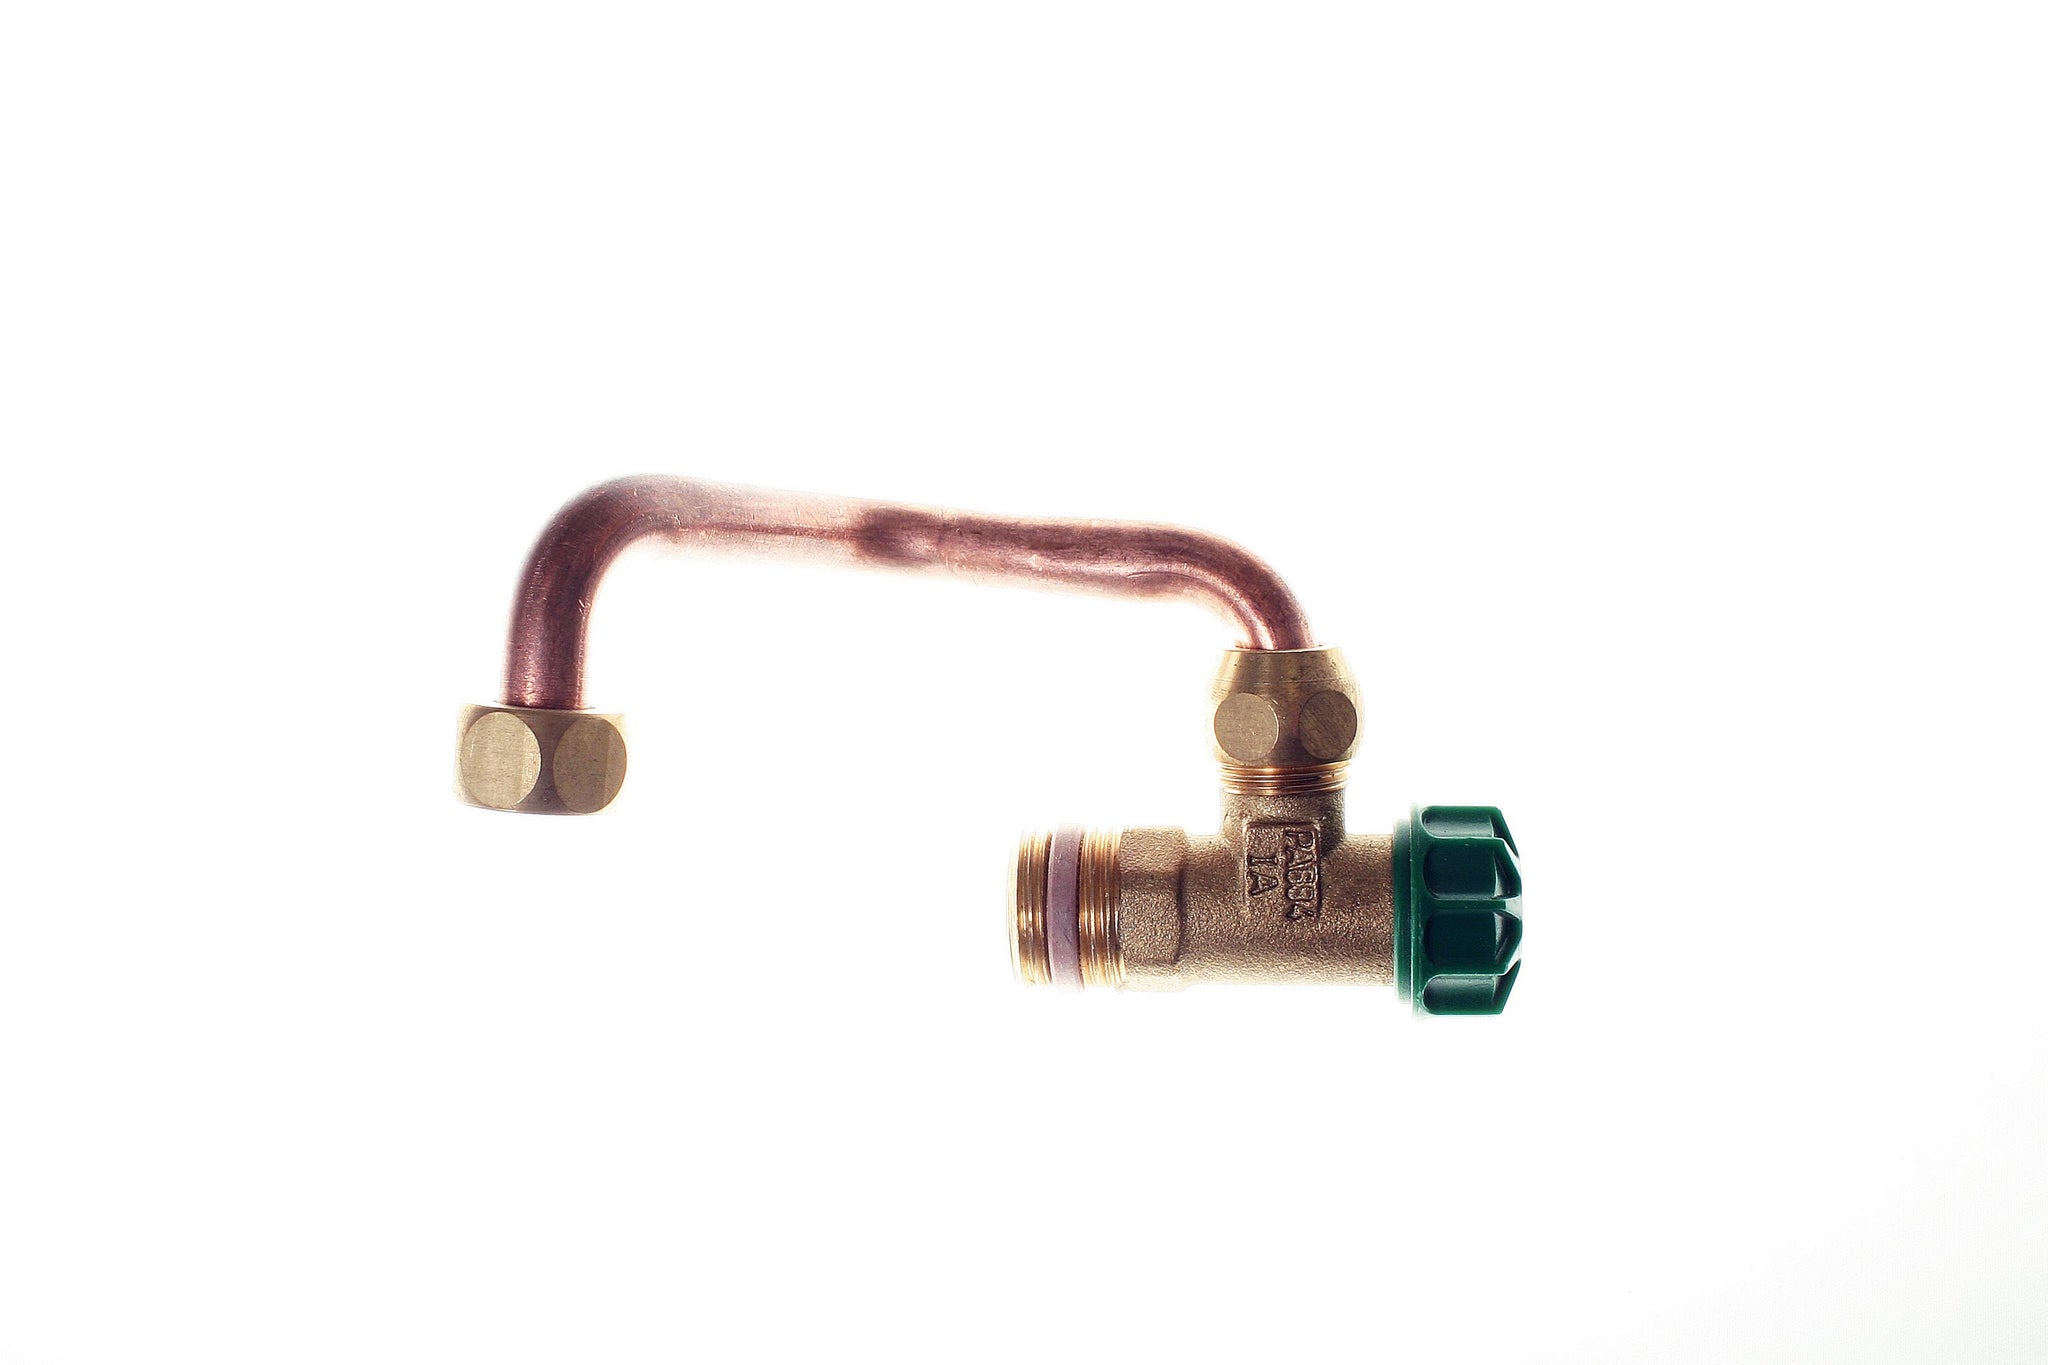 WC/ Toilet Concealed Cistern Brass Stop Valve & Pipe (After Sept 2000 Version) (Product Code: 03010104)